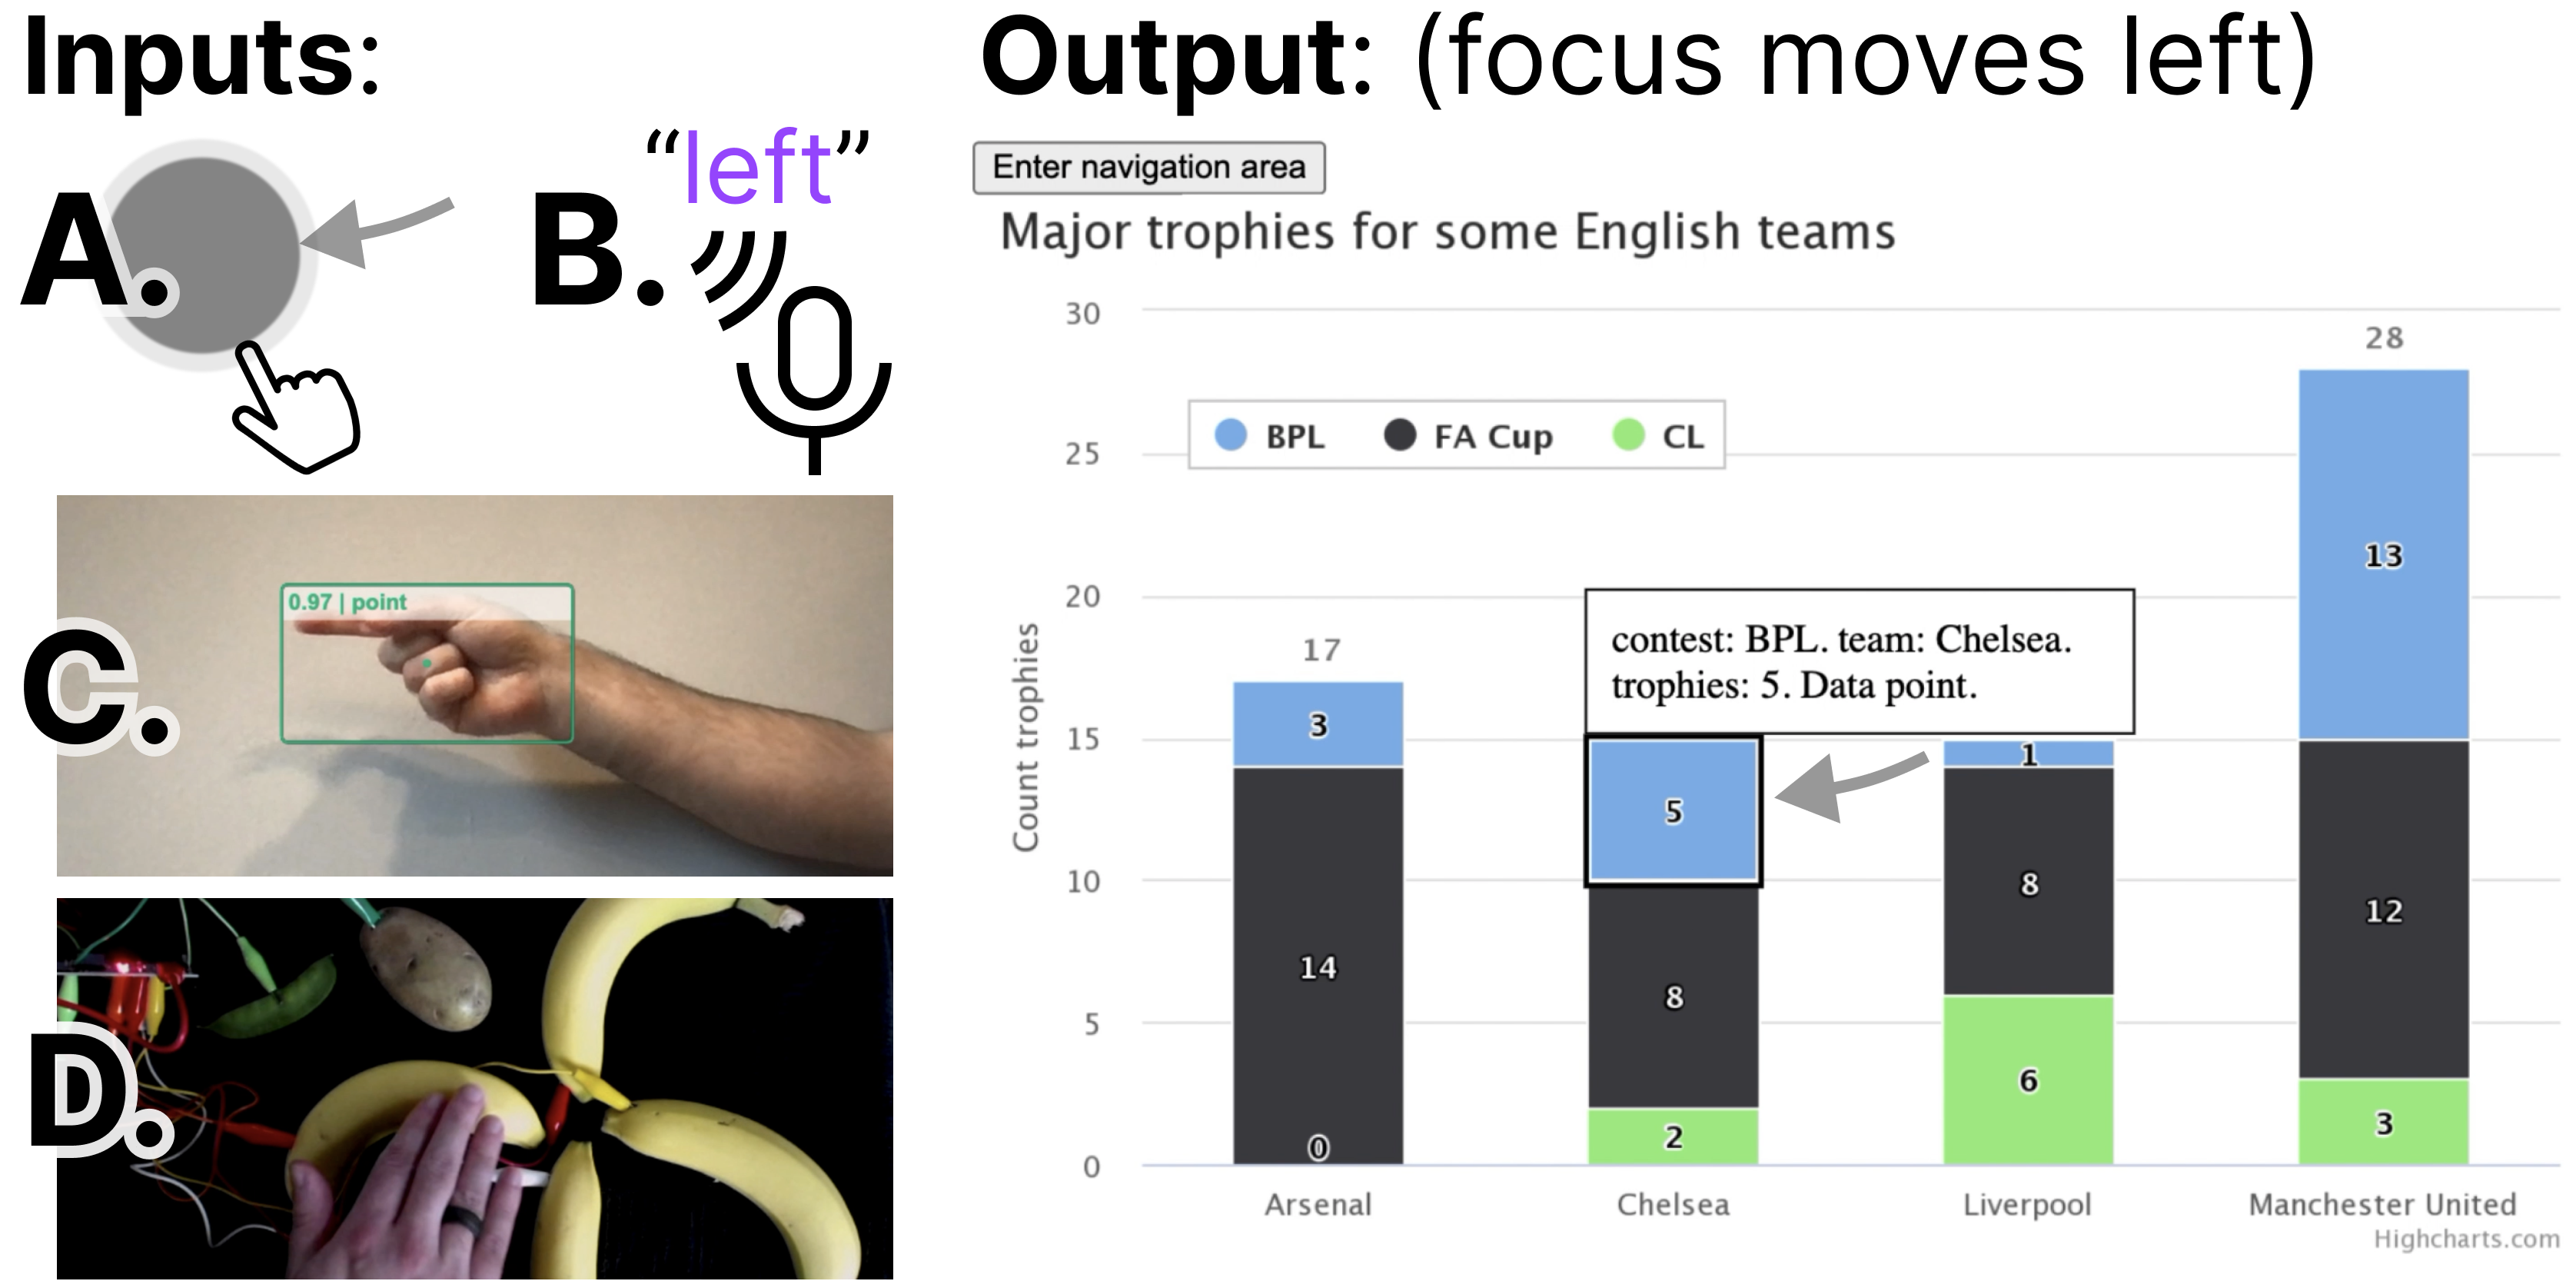 Image in two parts. First part: Inputs: A. Hand swiping. B: Speaking "left." C. A hand gesture on camera. D. Bananas. Second part: Output: (focus moves left) A focus indicator has moved on a bar chart from one stacked bar to another on its left.